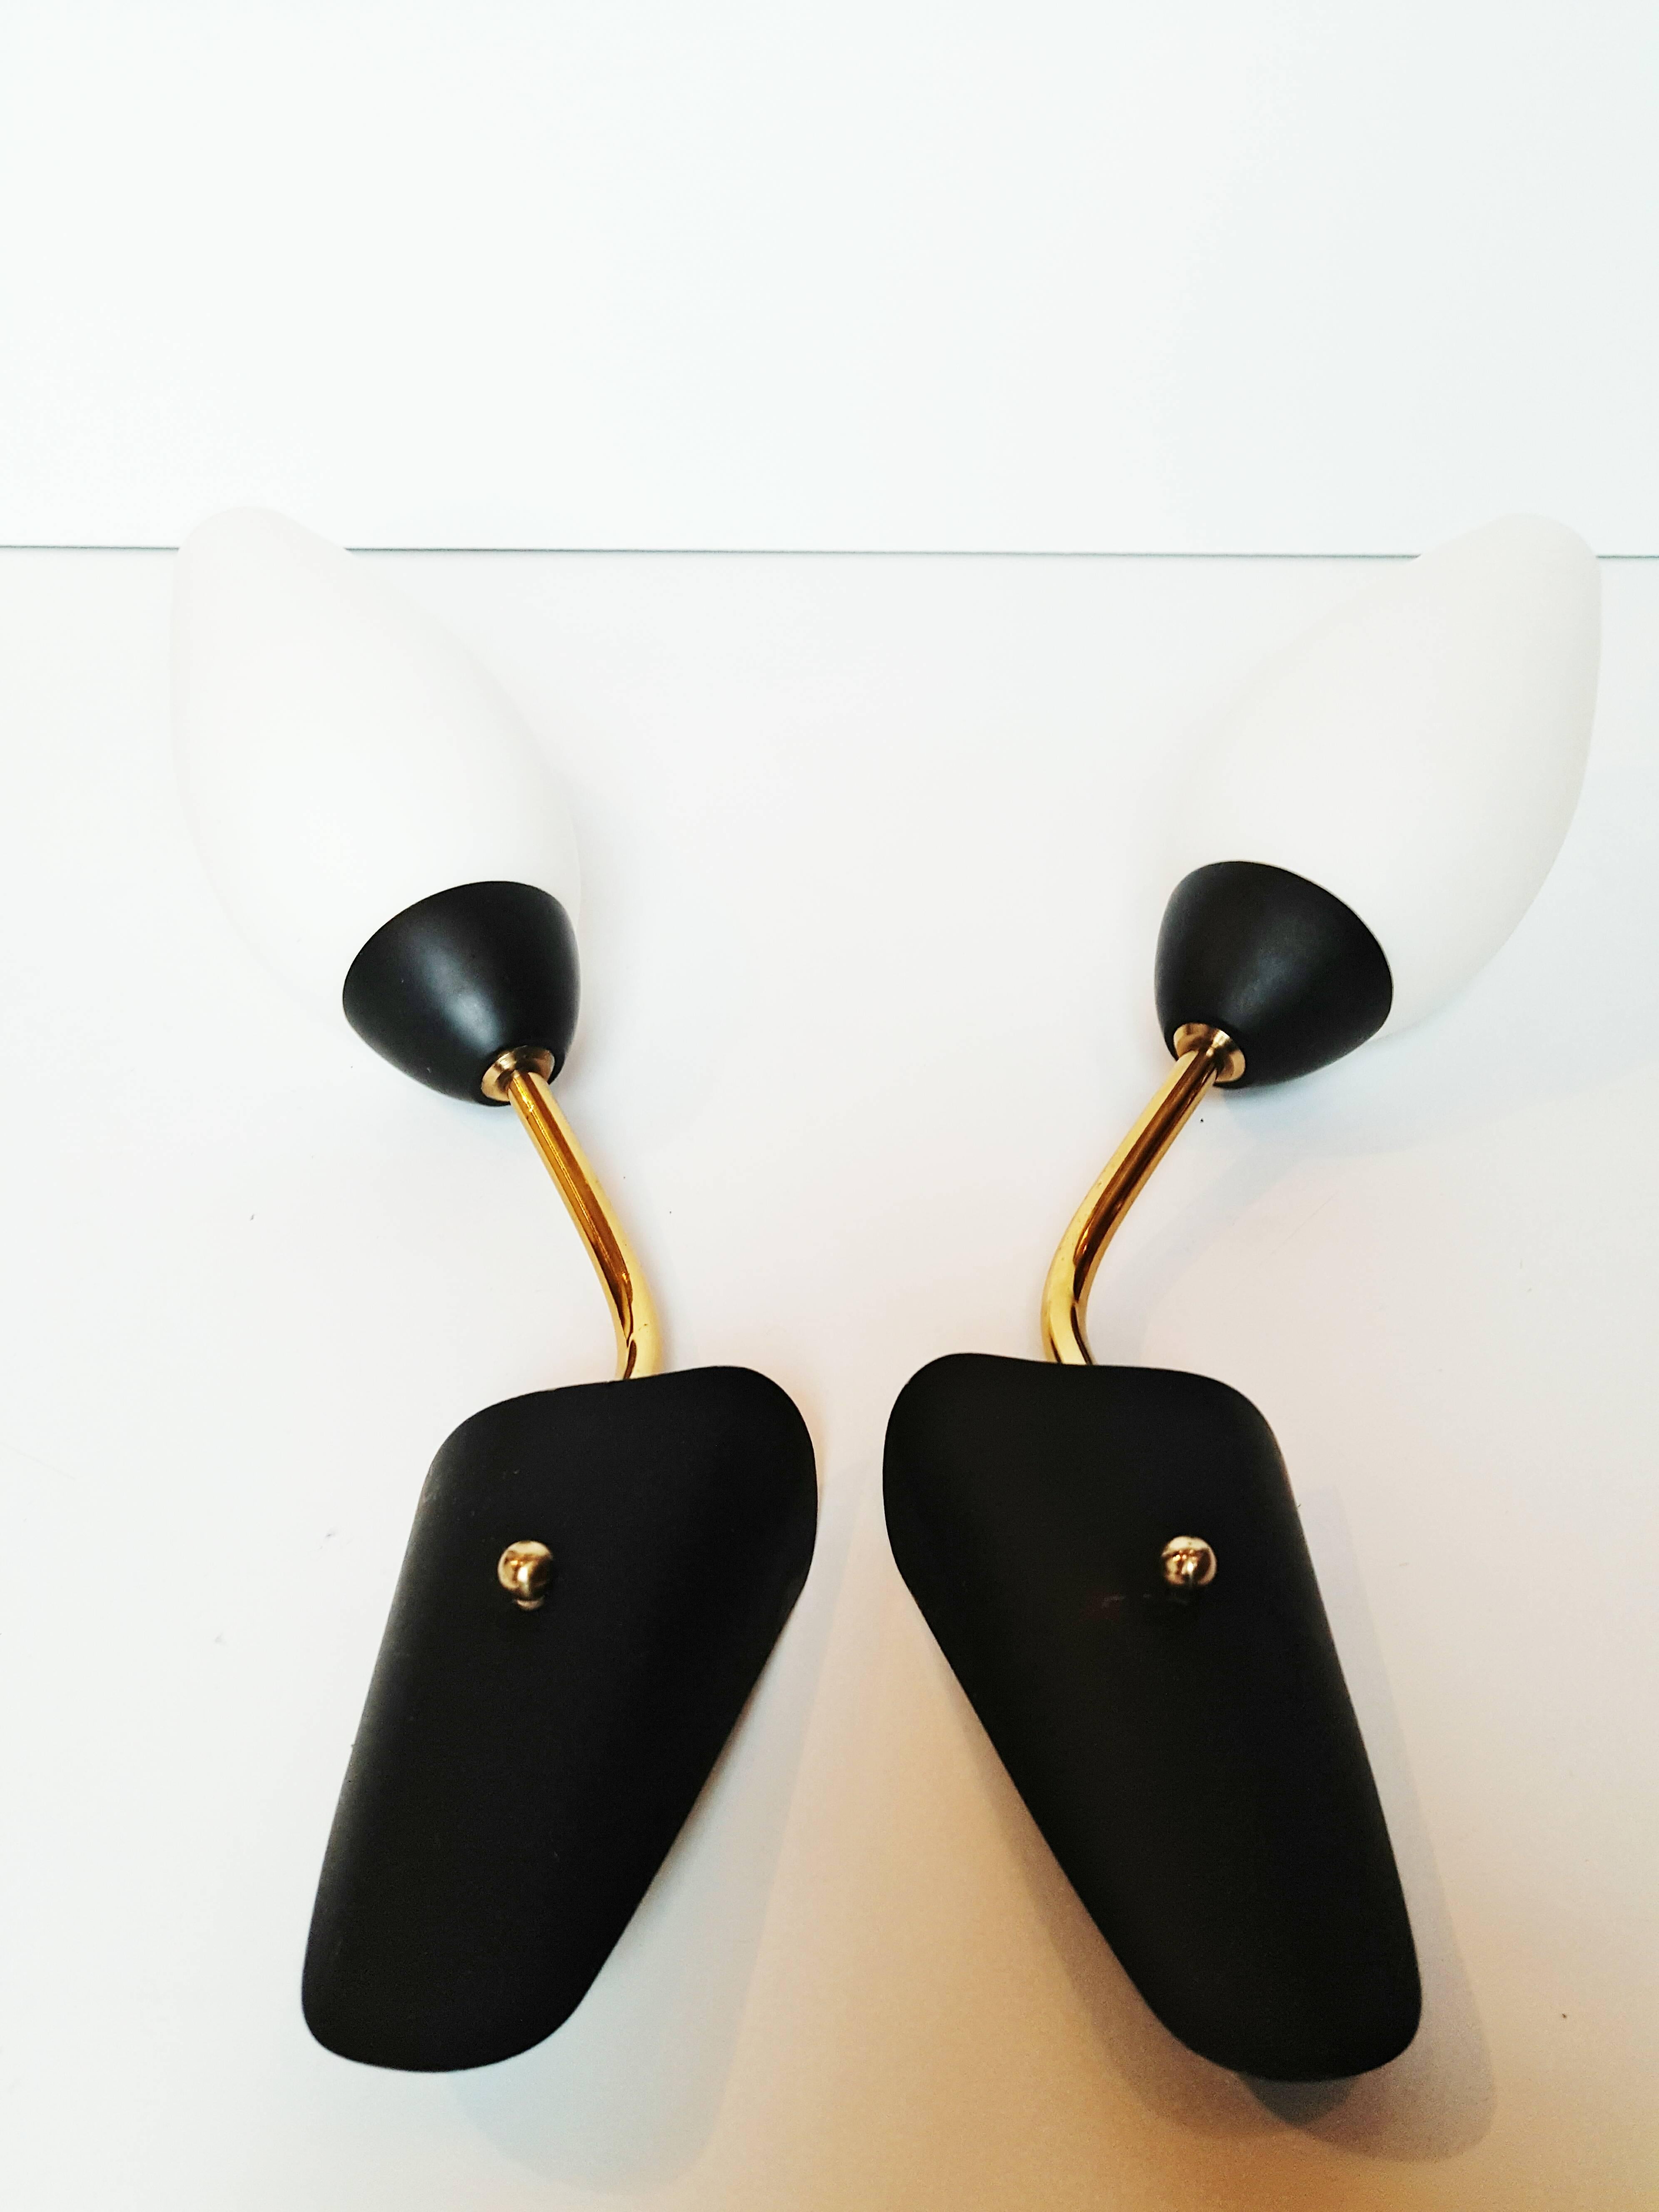 A great pair of original 1950s Italian wall lights coped of an aged brass and black enamel frame with white frosted cone glass shades.
In very good vintage condition.